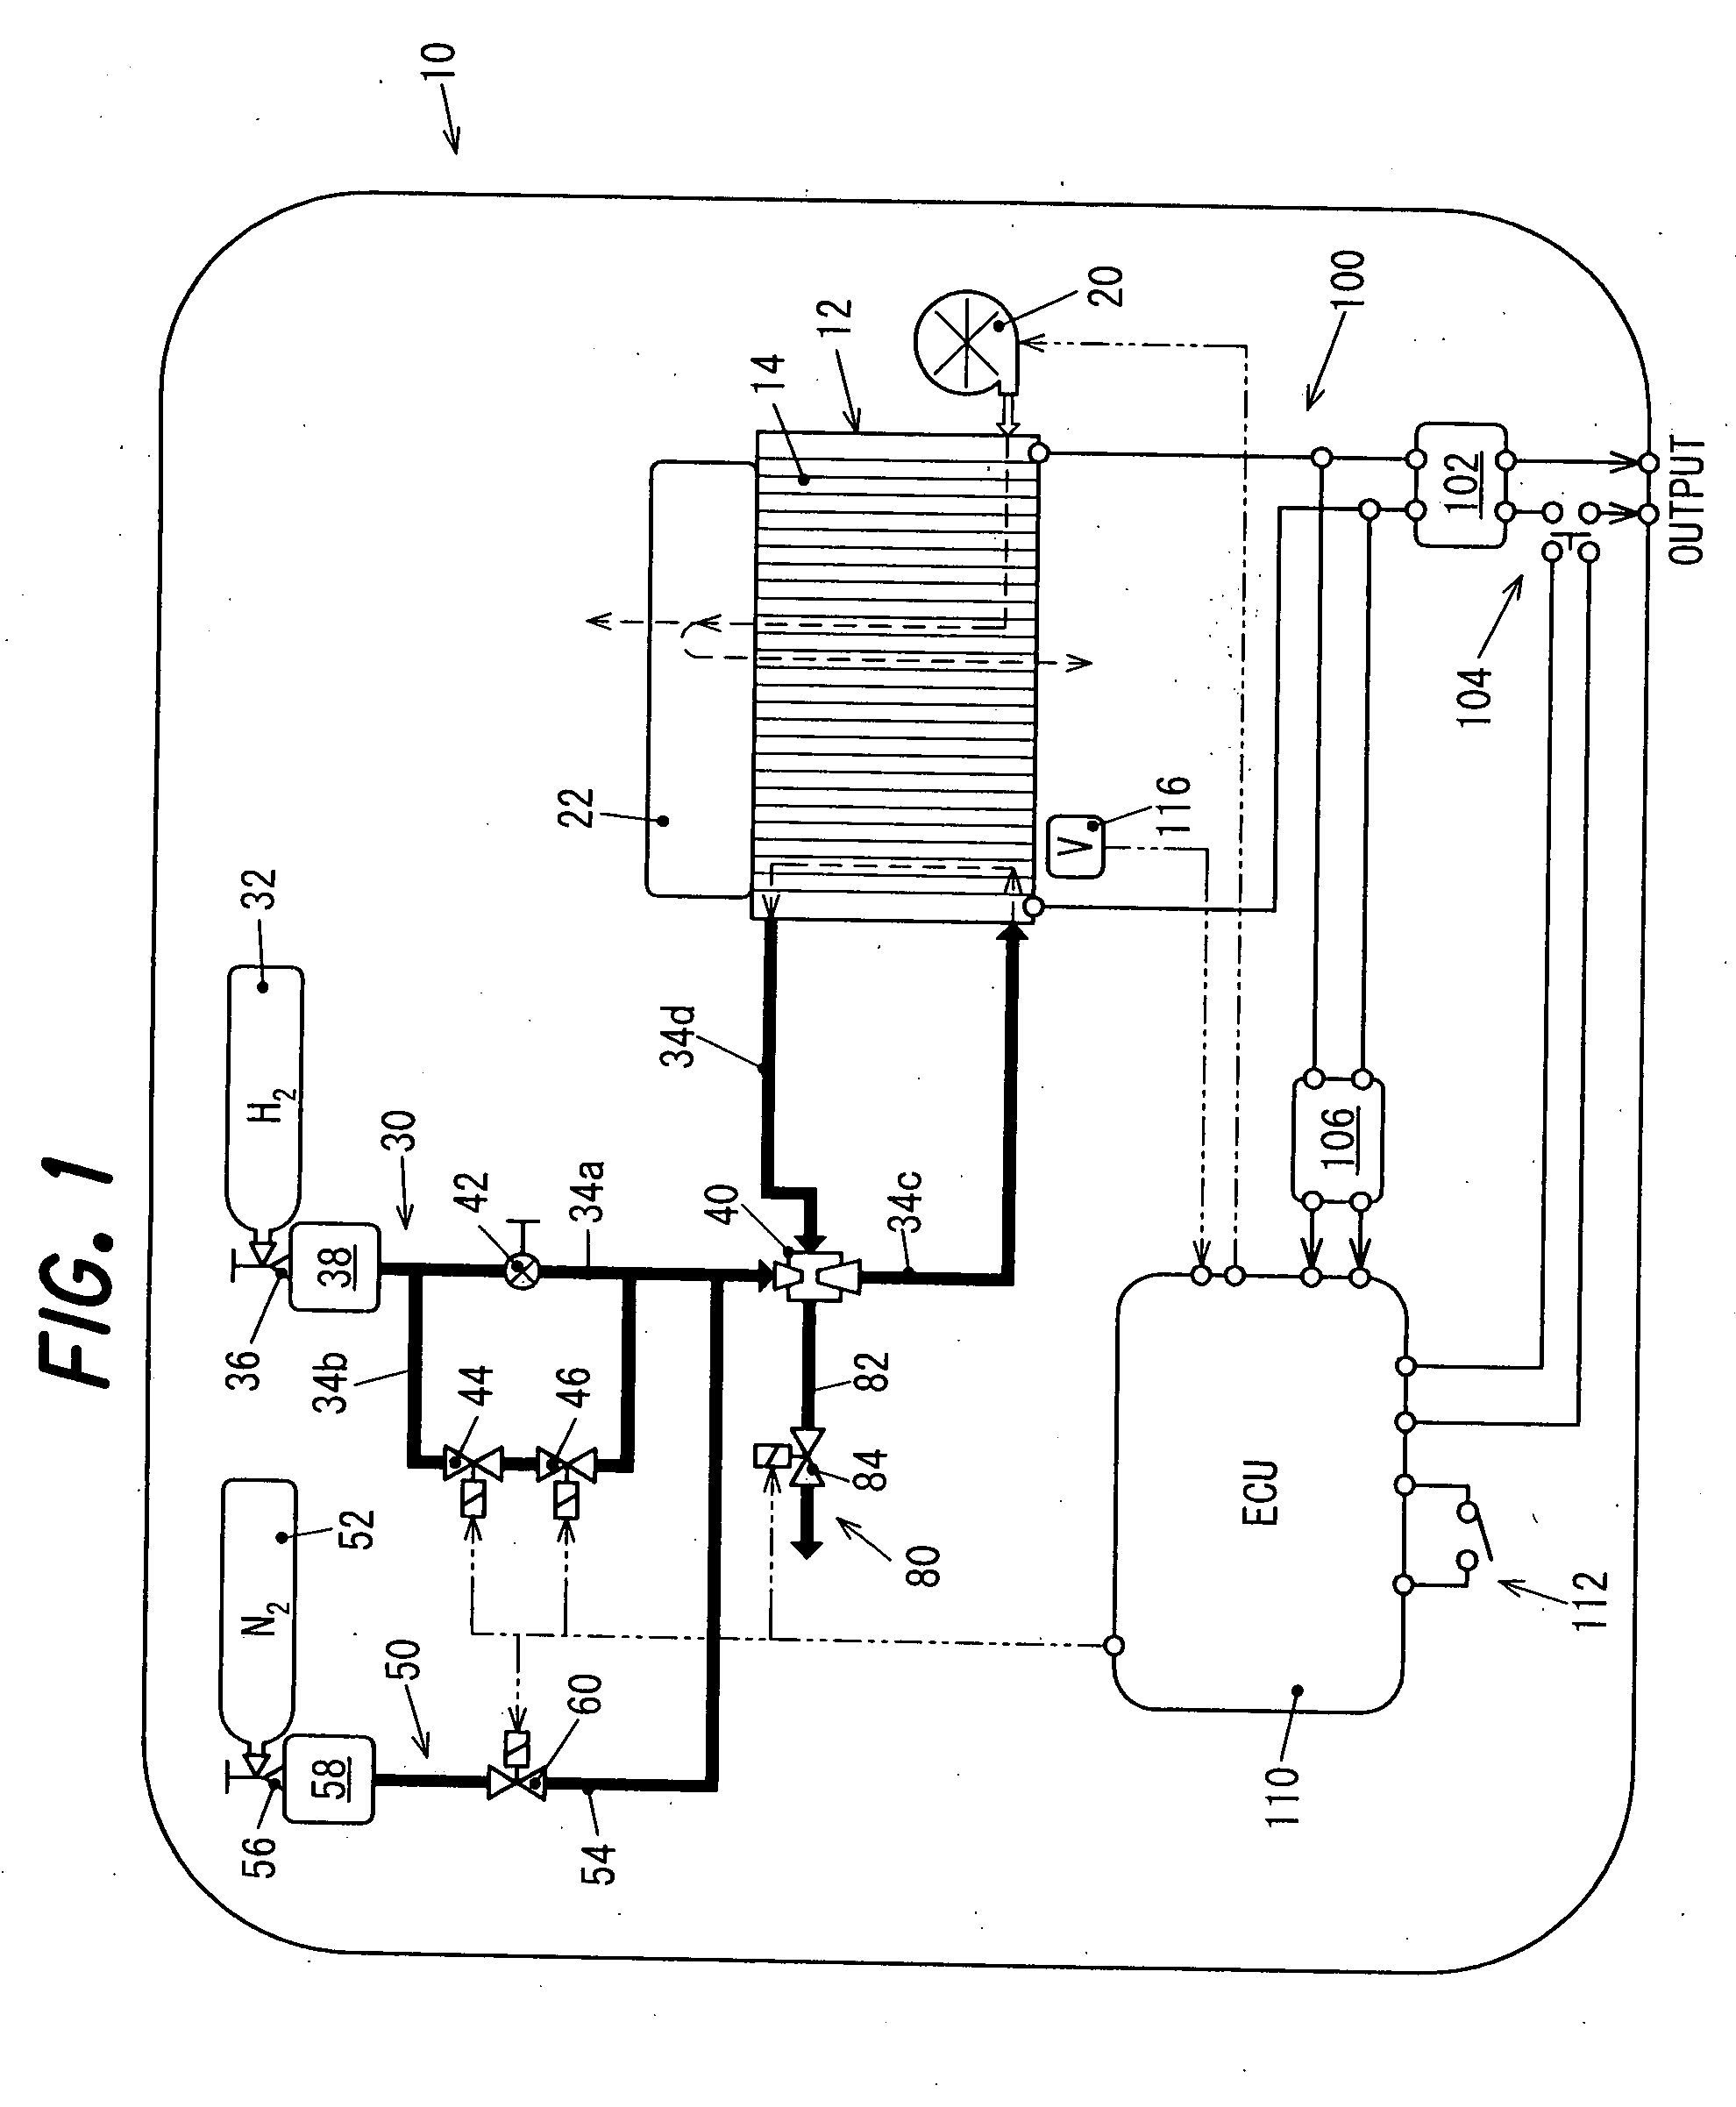 Air supply apparatus for a fuel cell